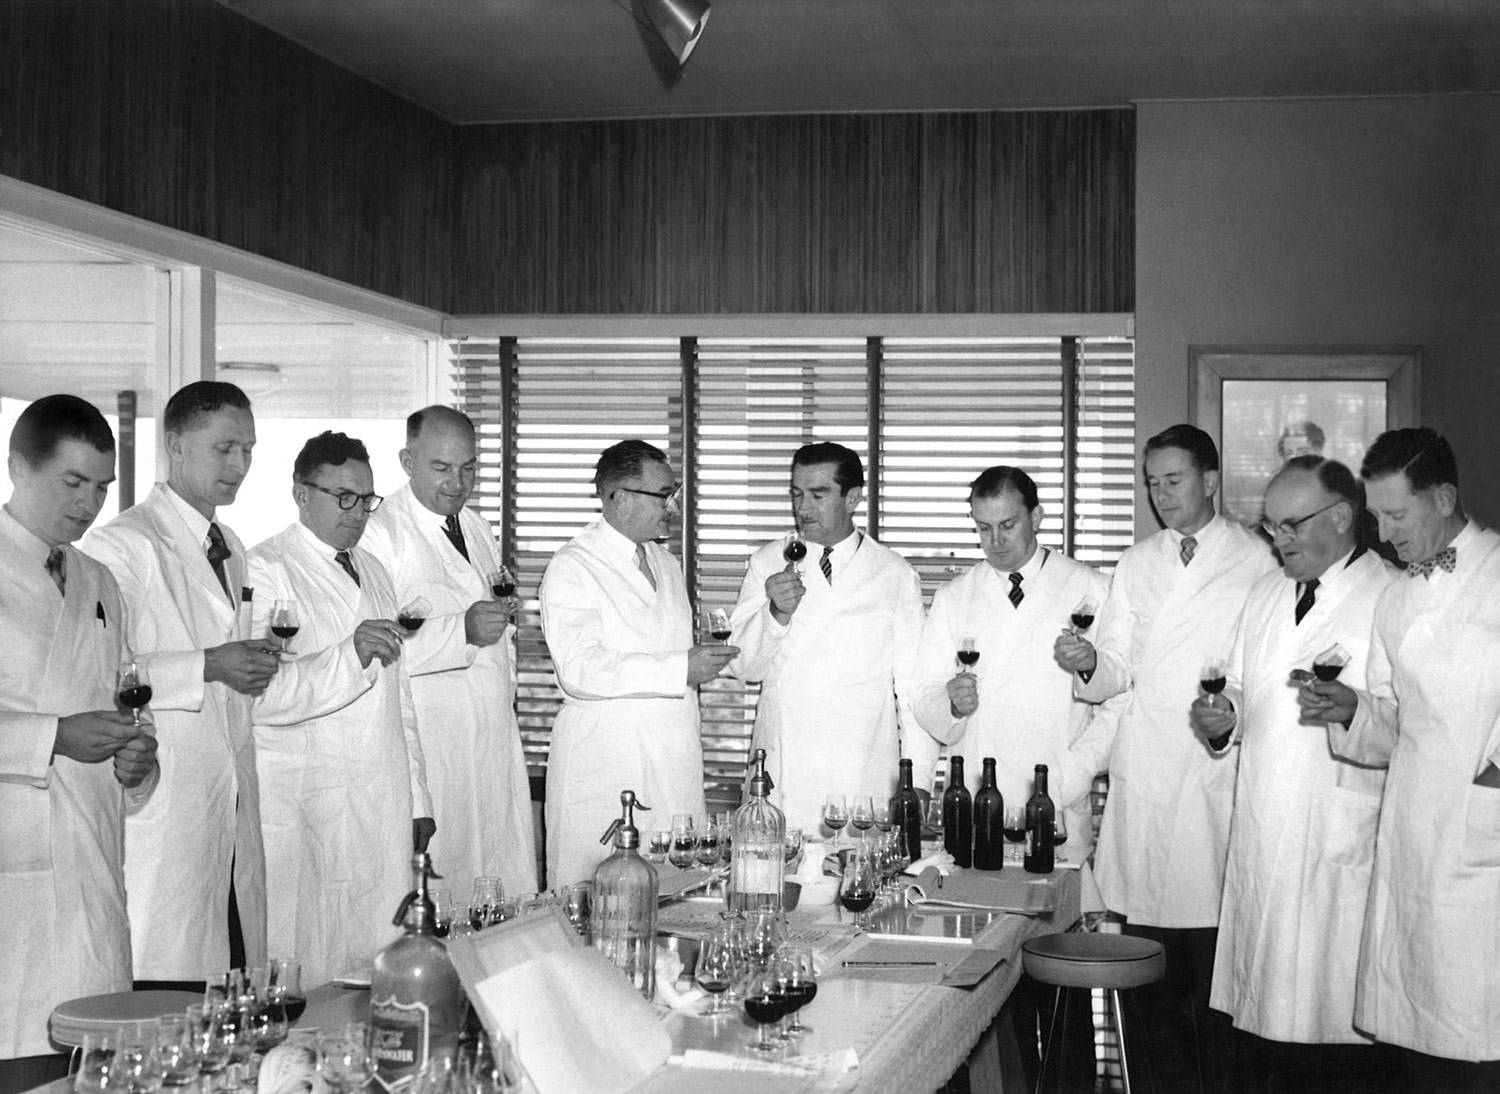 The Penfolds winemaking team in 1950 | 2022